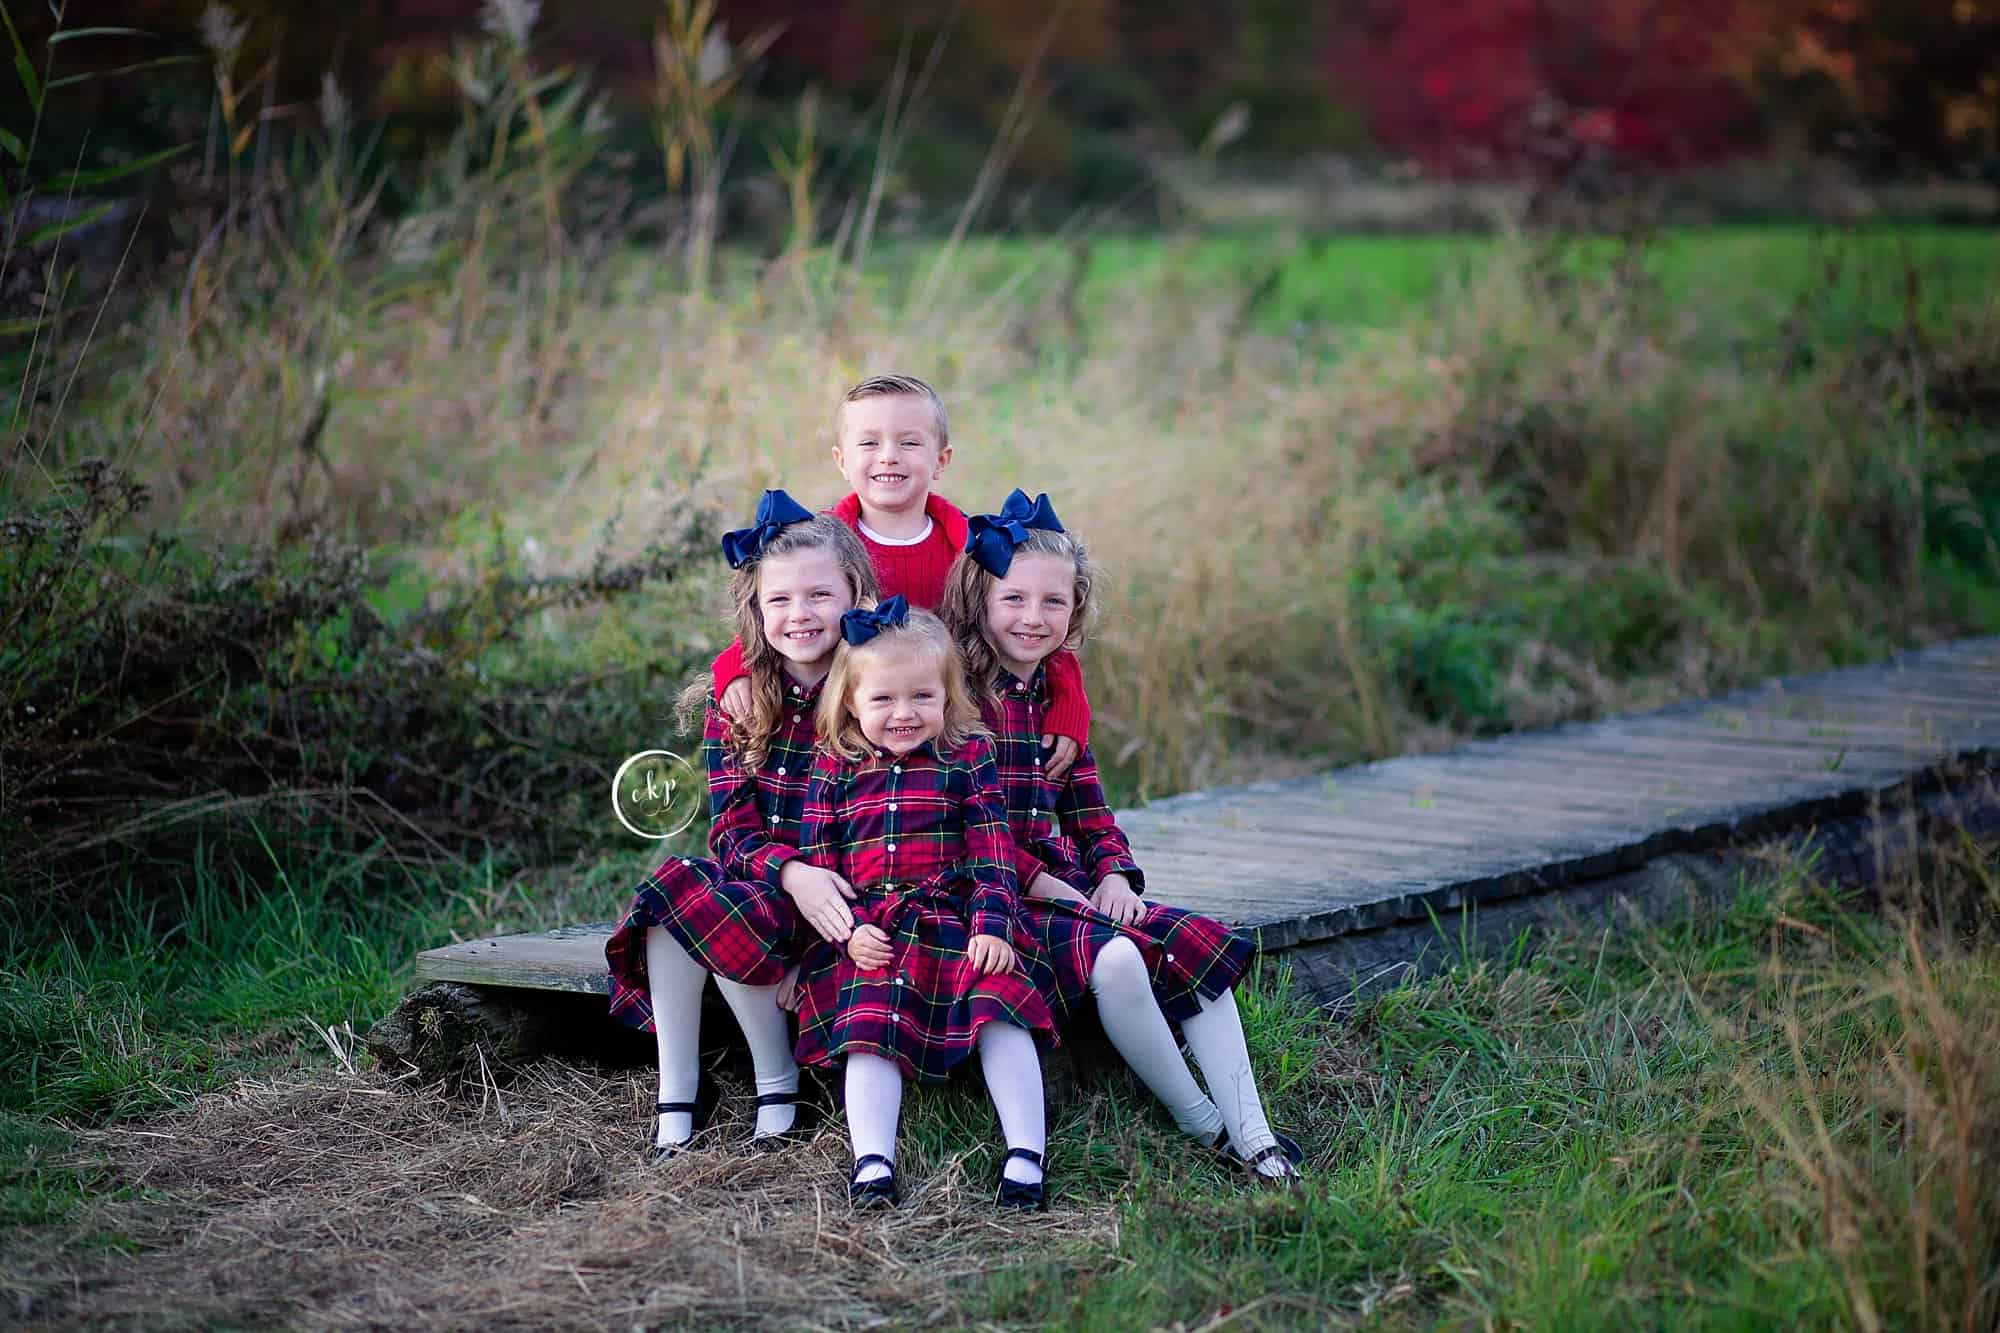 Fall family photography portraits in new england large family madison ct park folaage